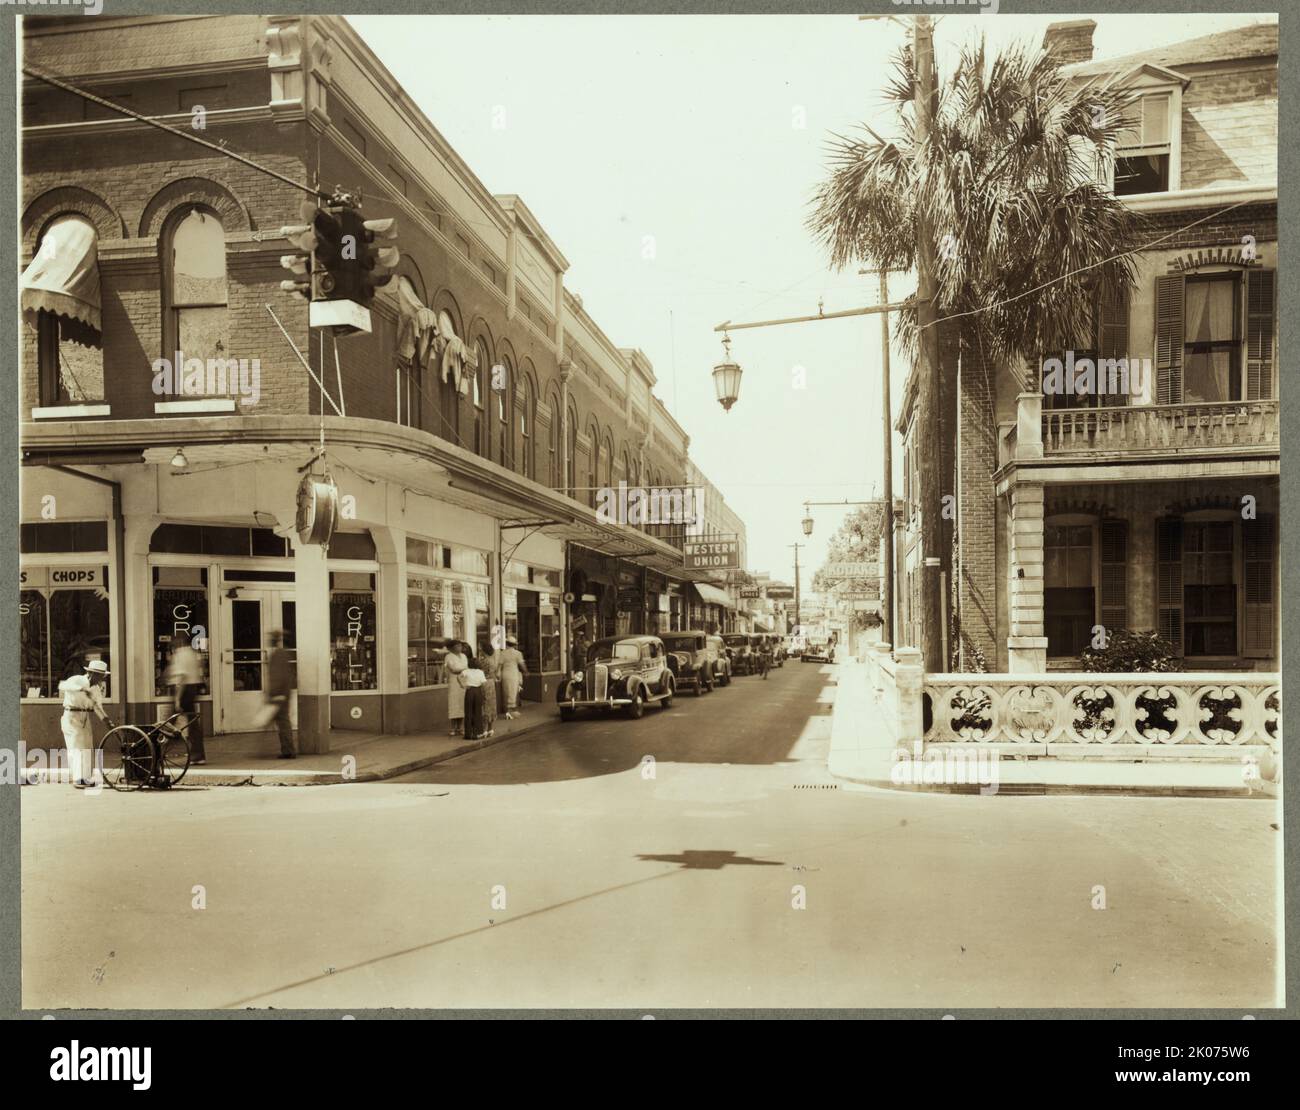 St. George Street, St. Augustine, St. Johns County, Florida, 1937. [Neptune Grill on the corner, Western Union office further down the street]. Stock Photo